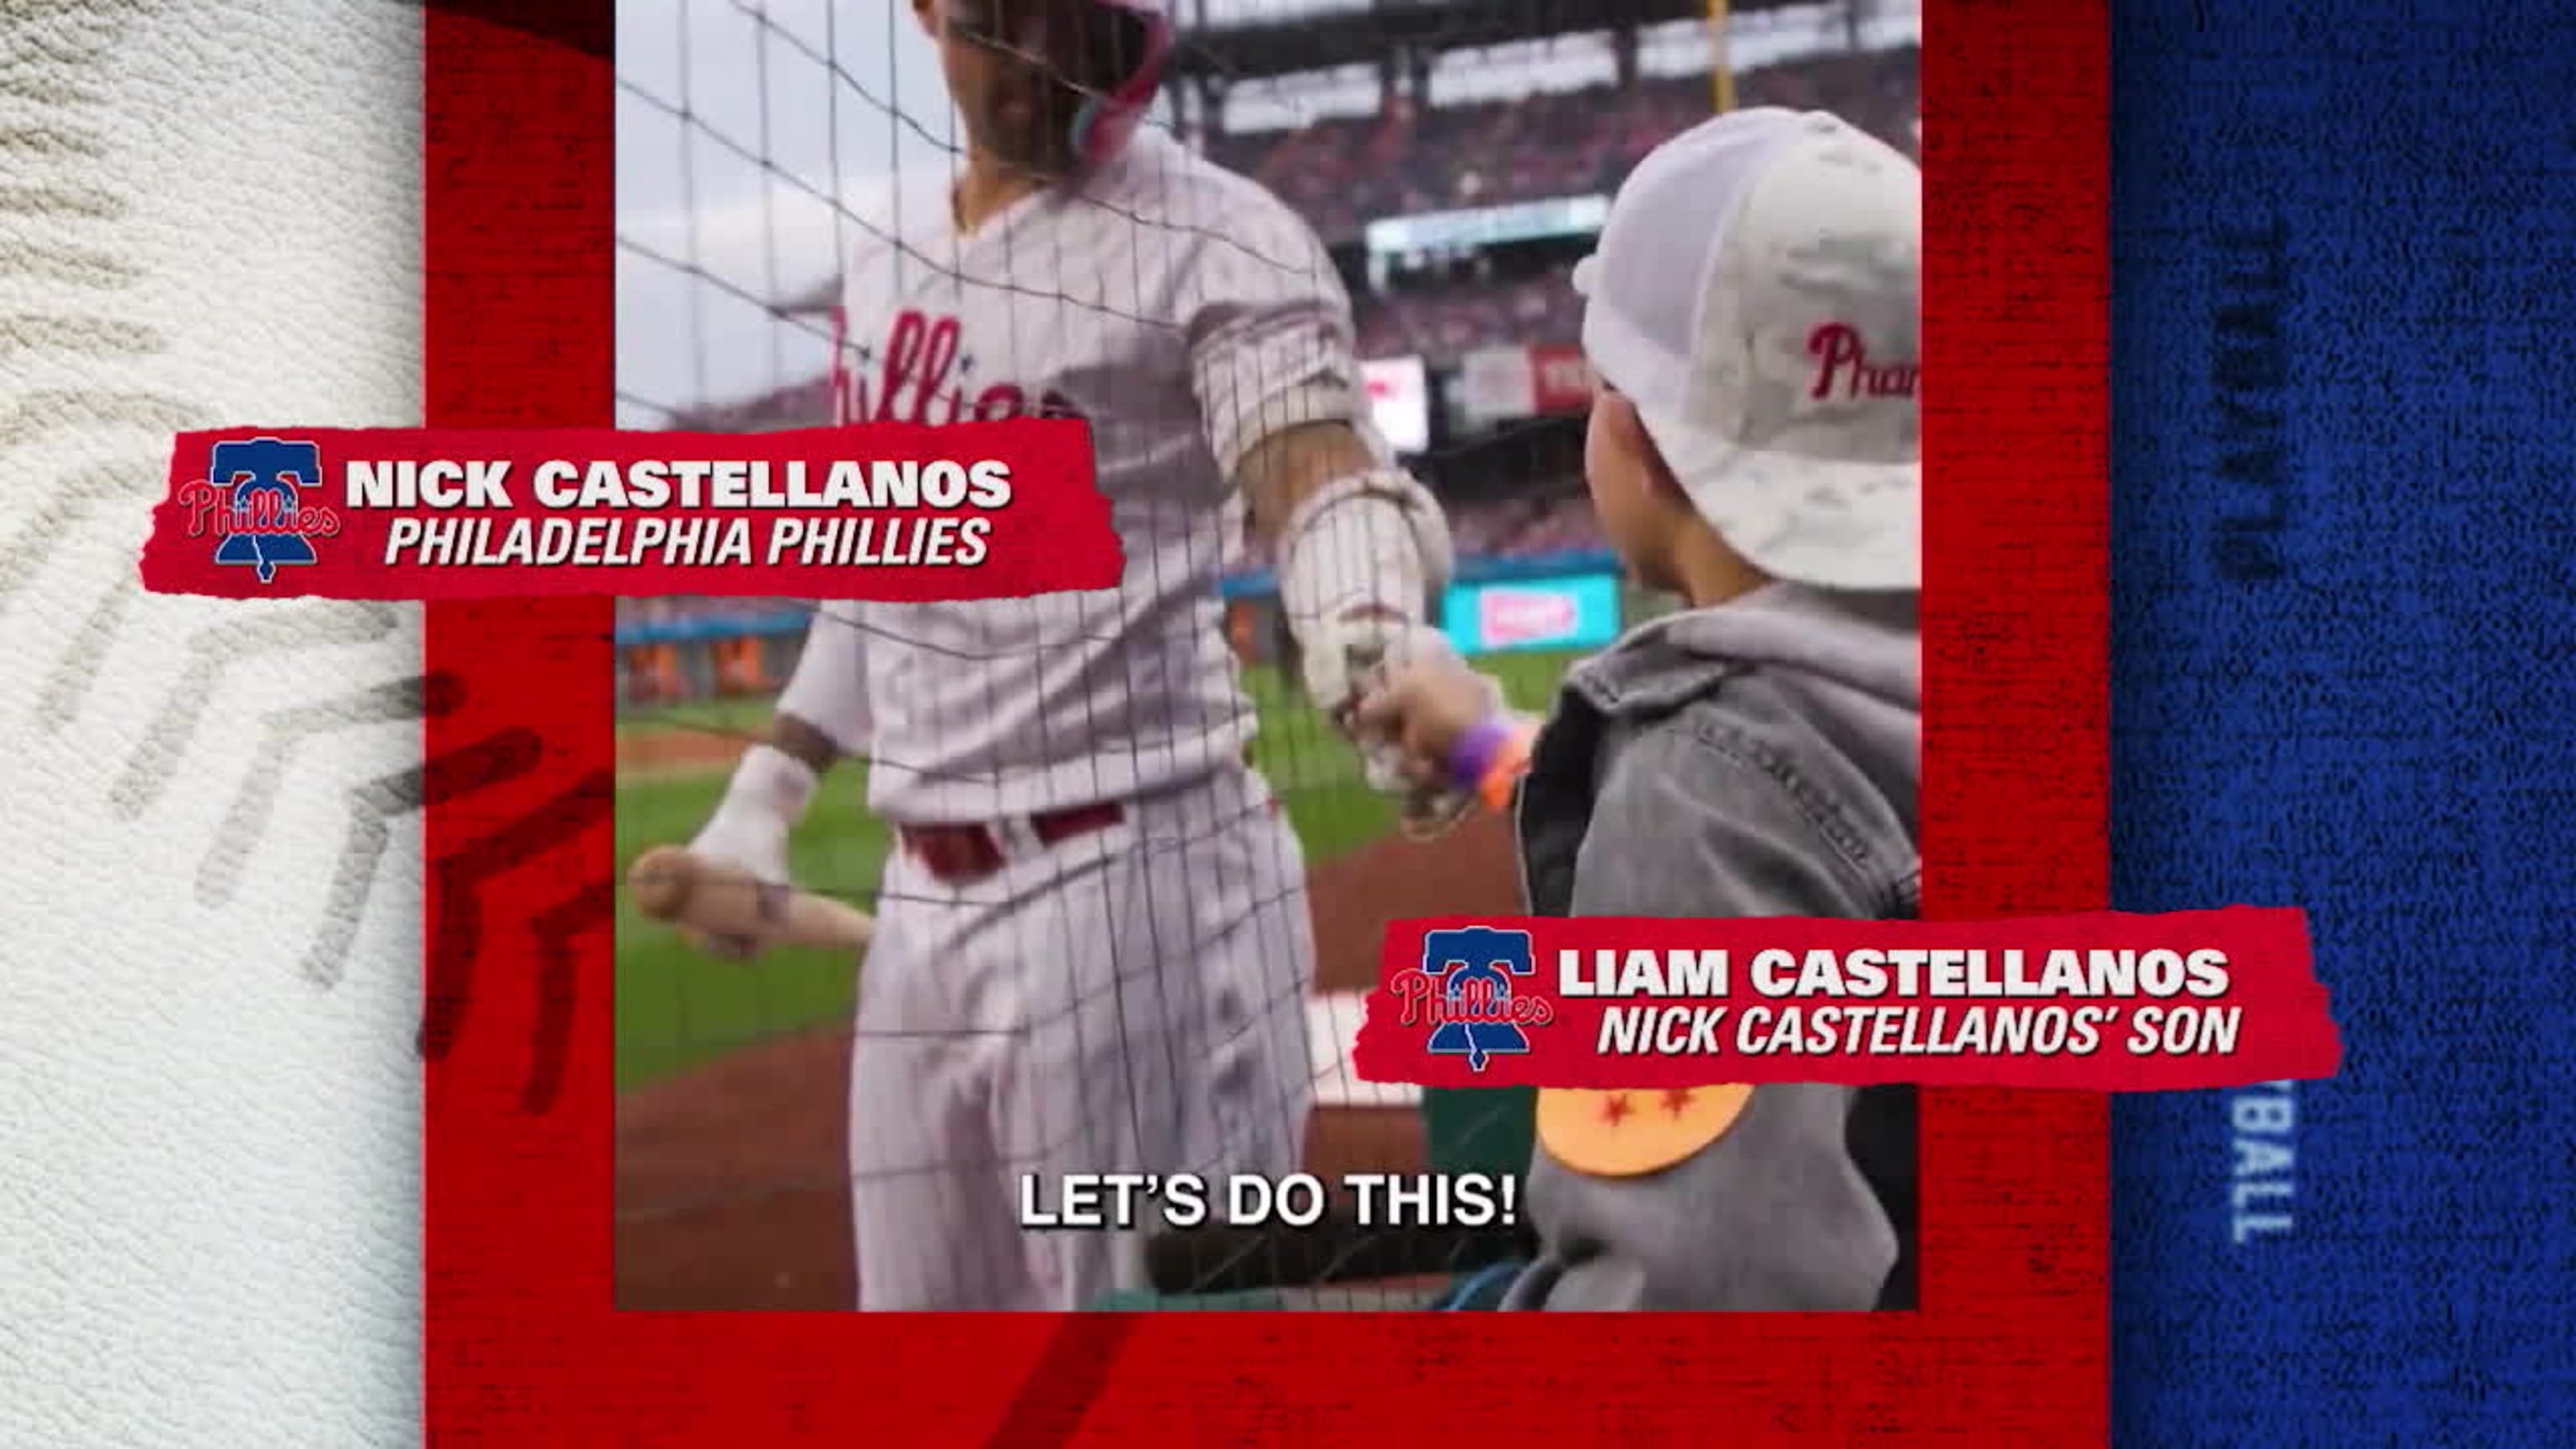 Nick Castellanos' son Liam has become part of the Phillies